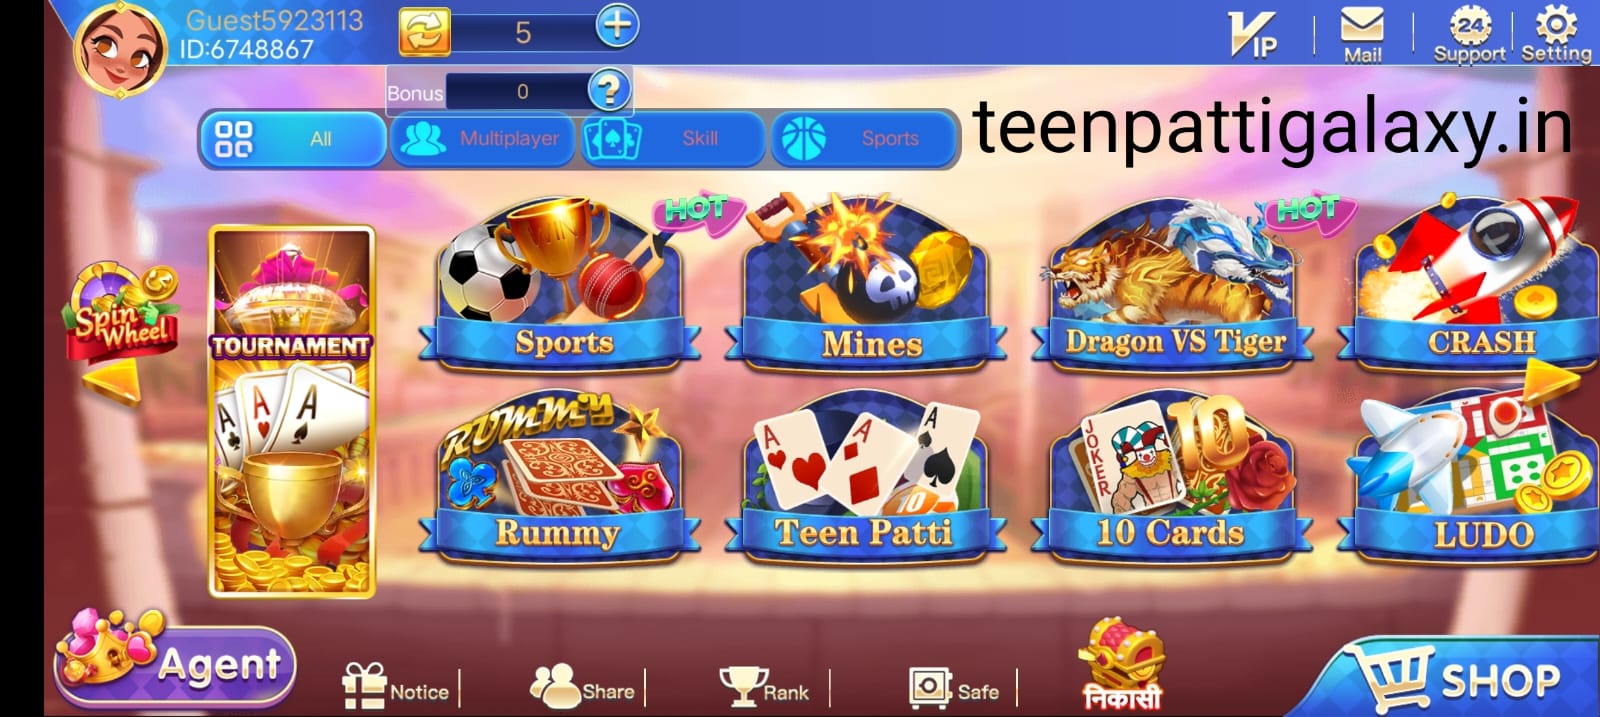 Available Game’s In Rummy Joy Application